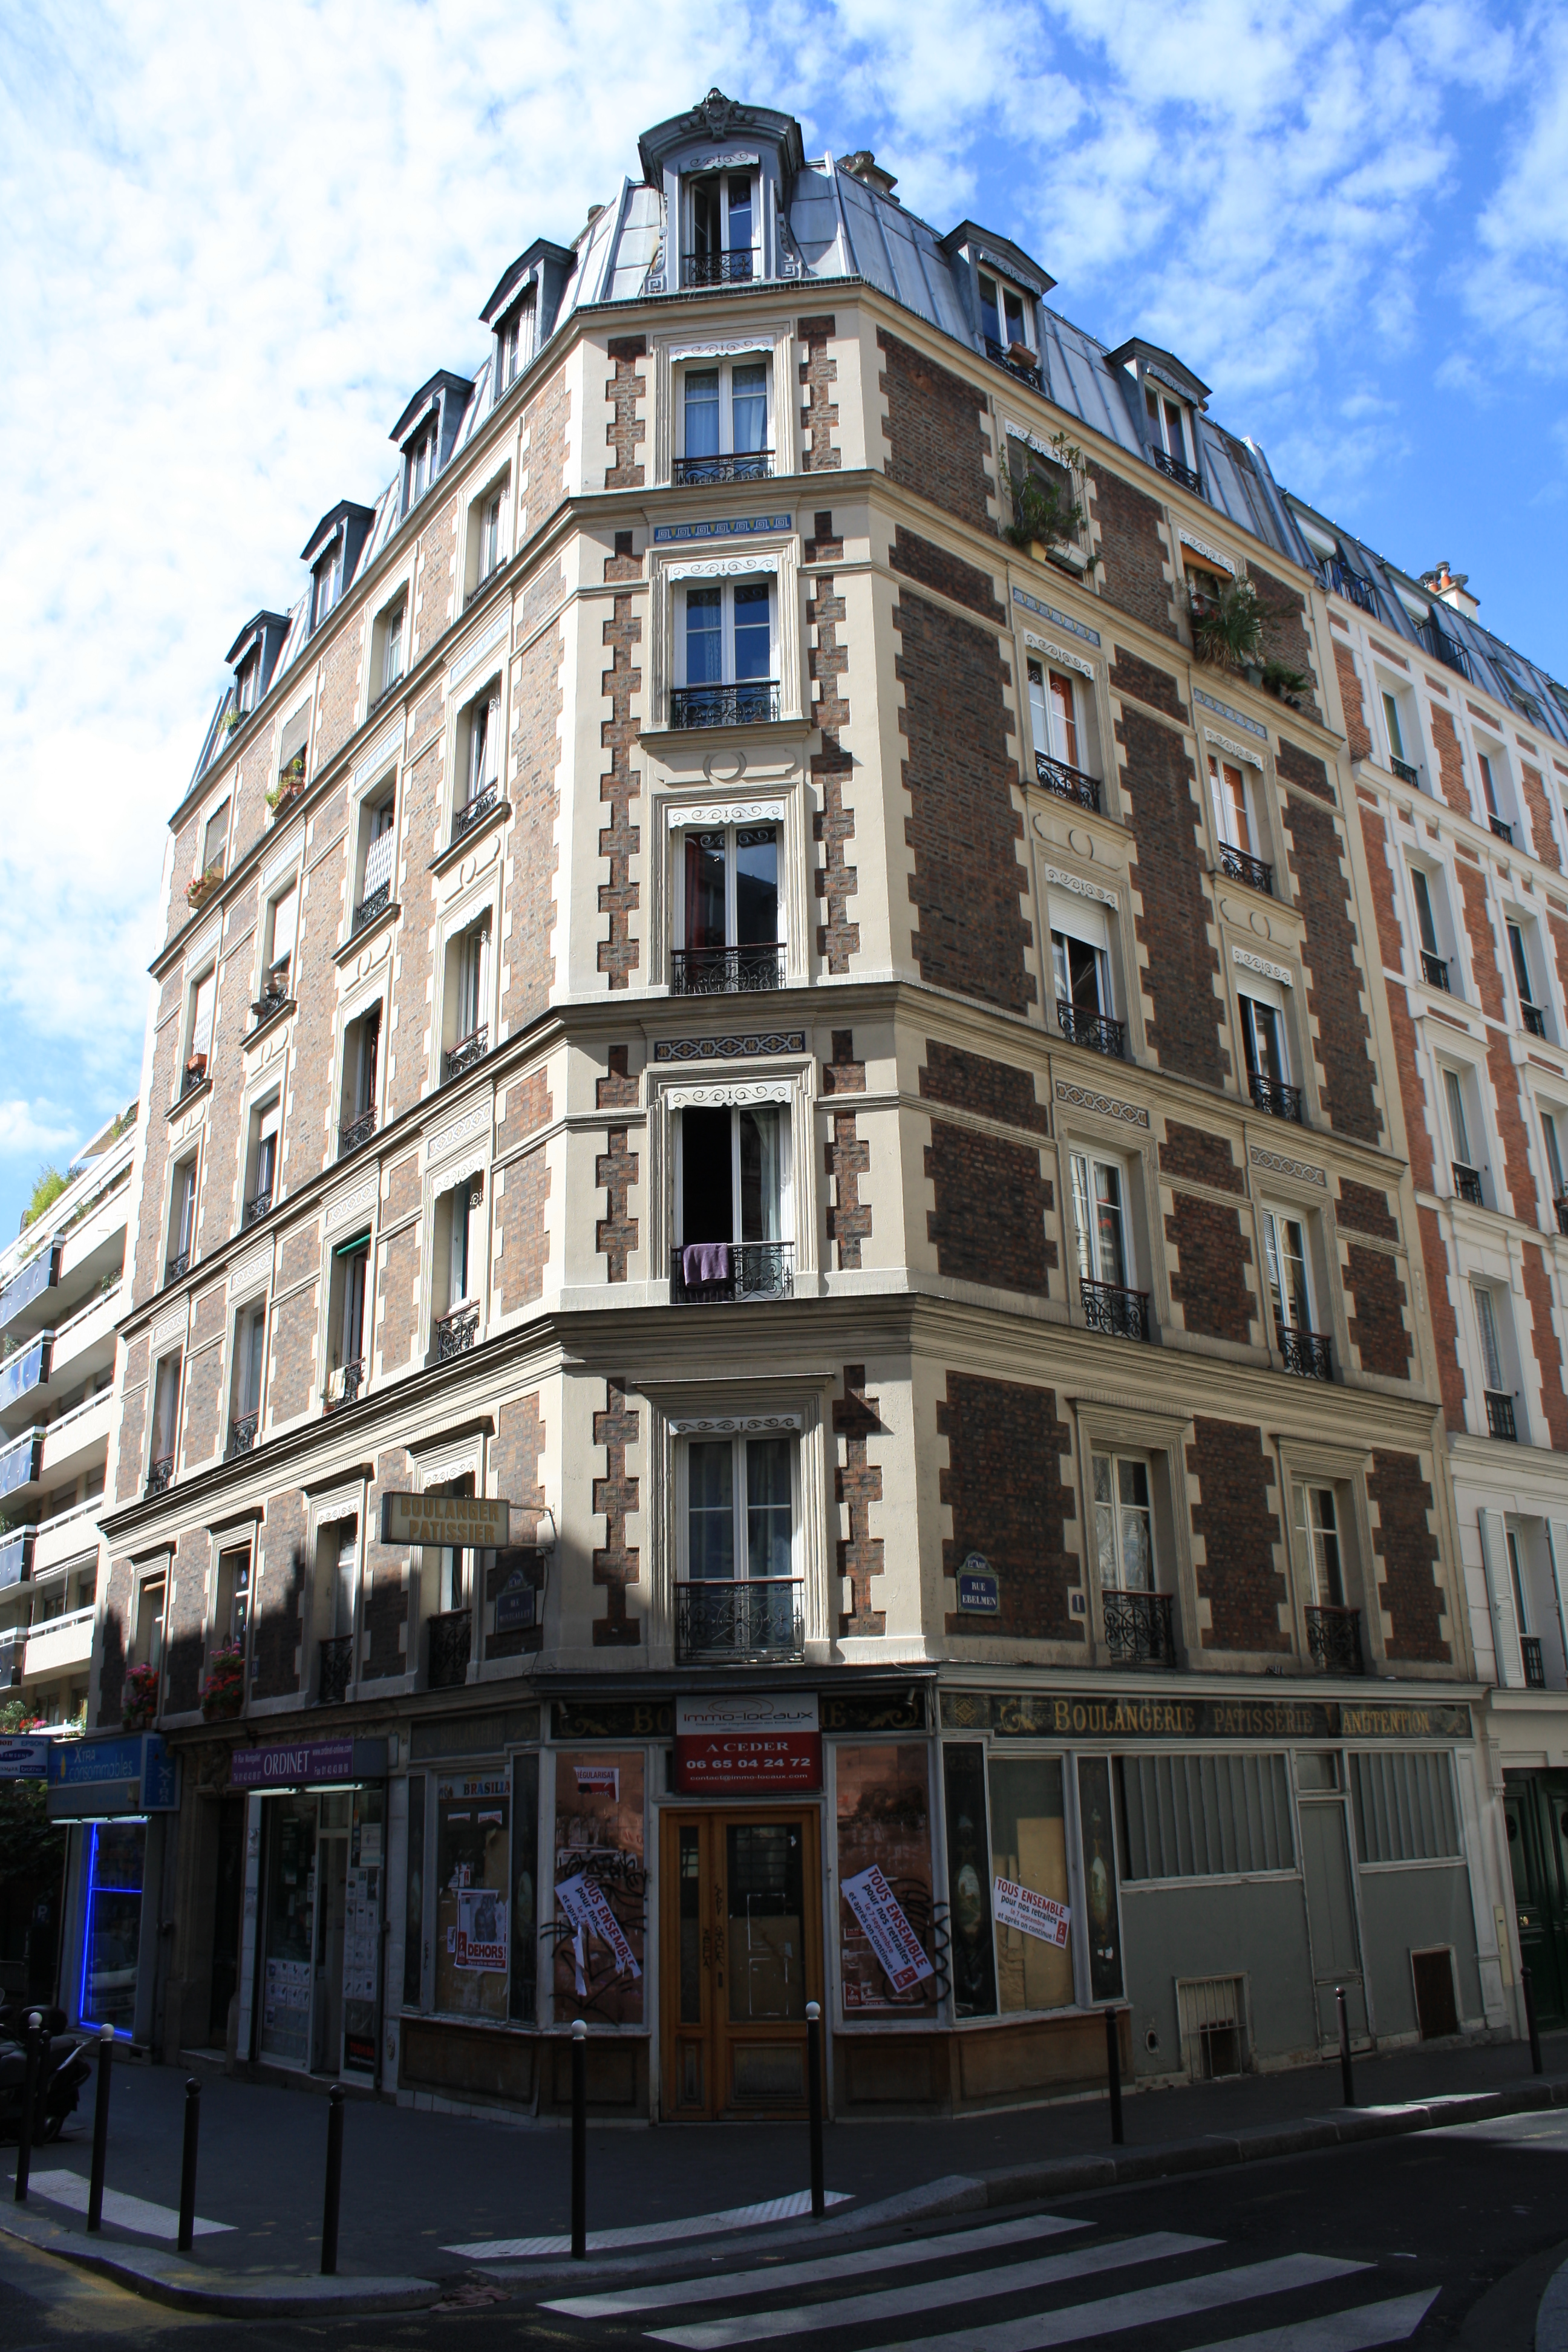 File:Building with old bakery at 19 Montgallet street in Paris.jpg ...